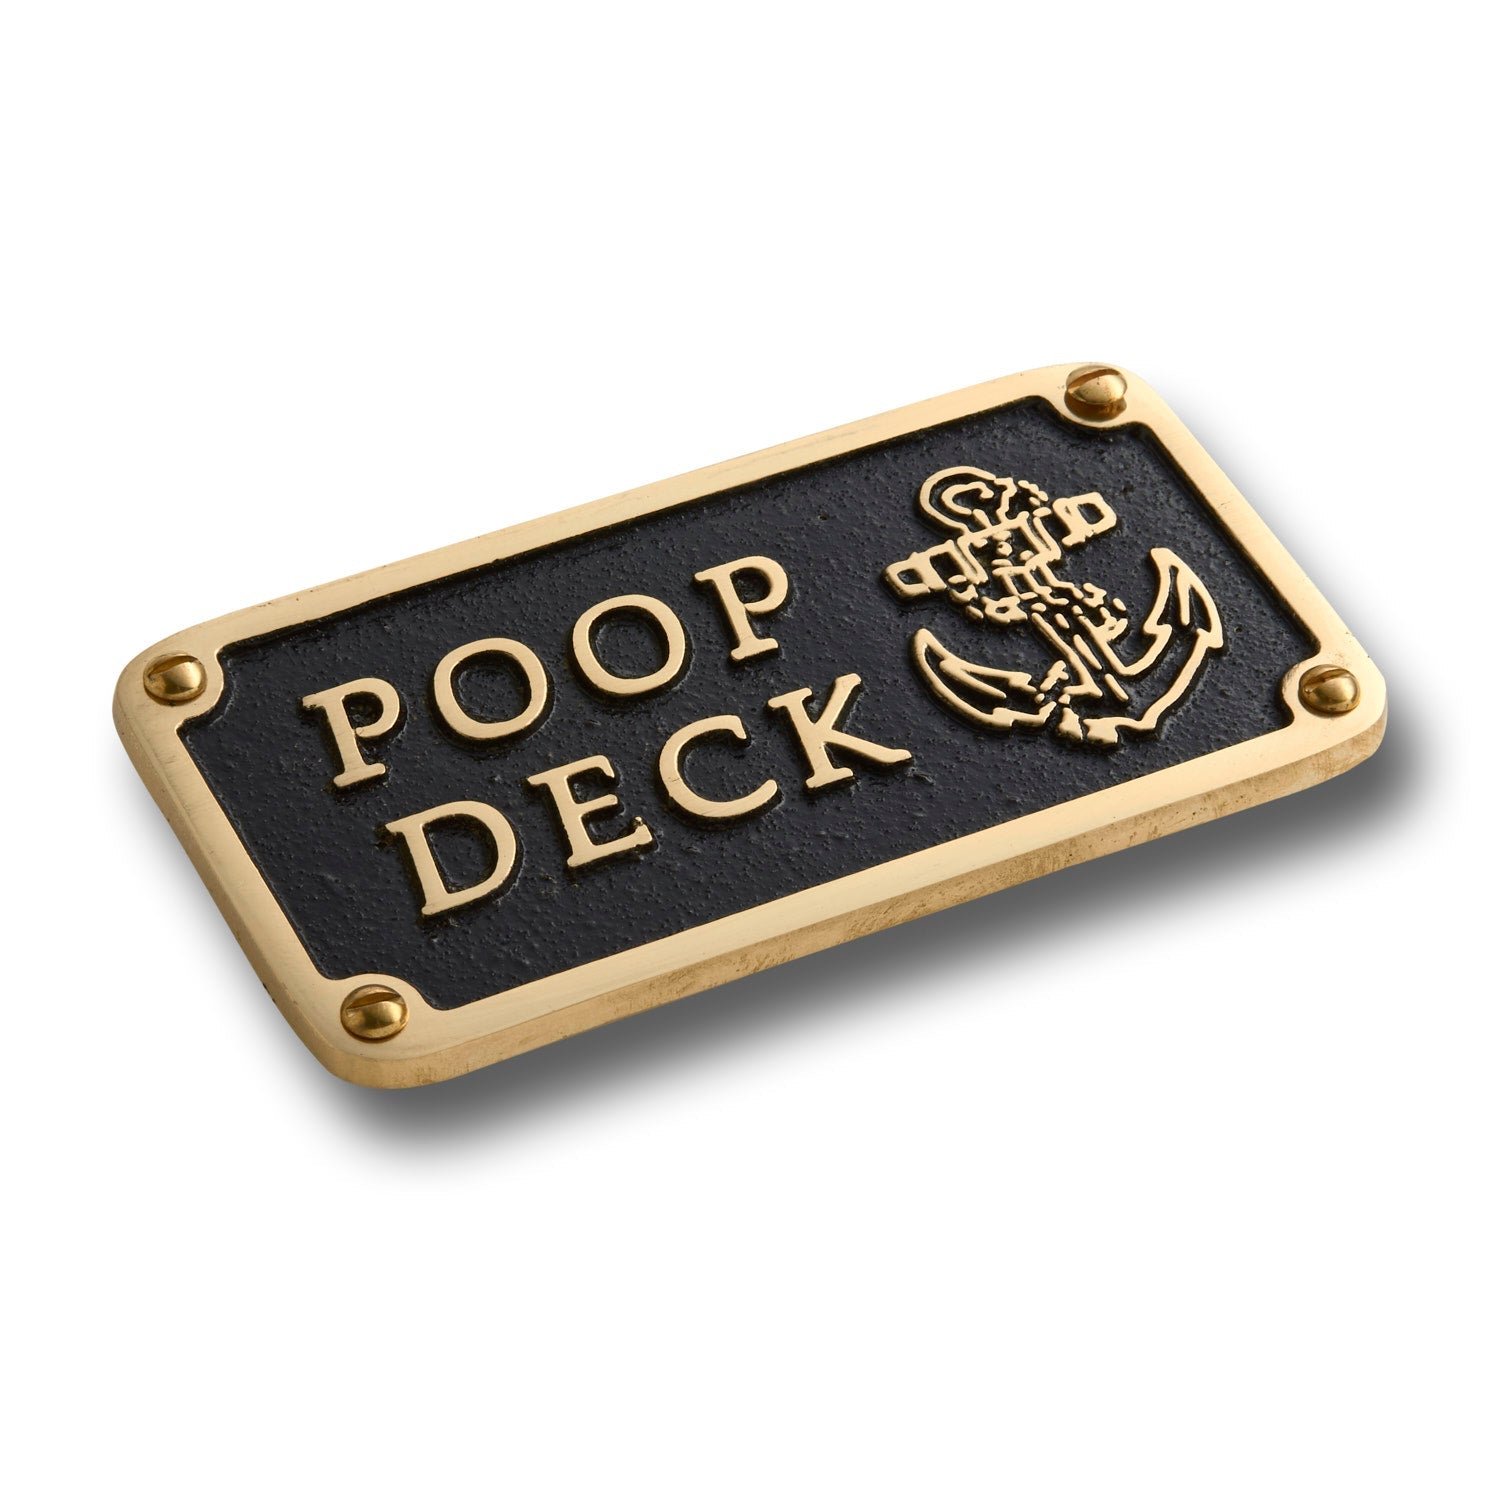 Nautical 'POOP DECK' Sign - The Metal Foundry